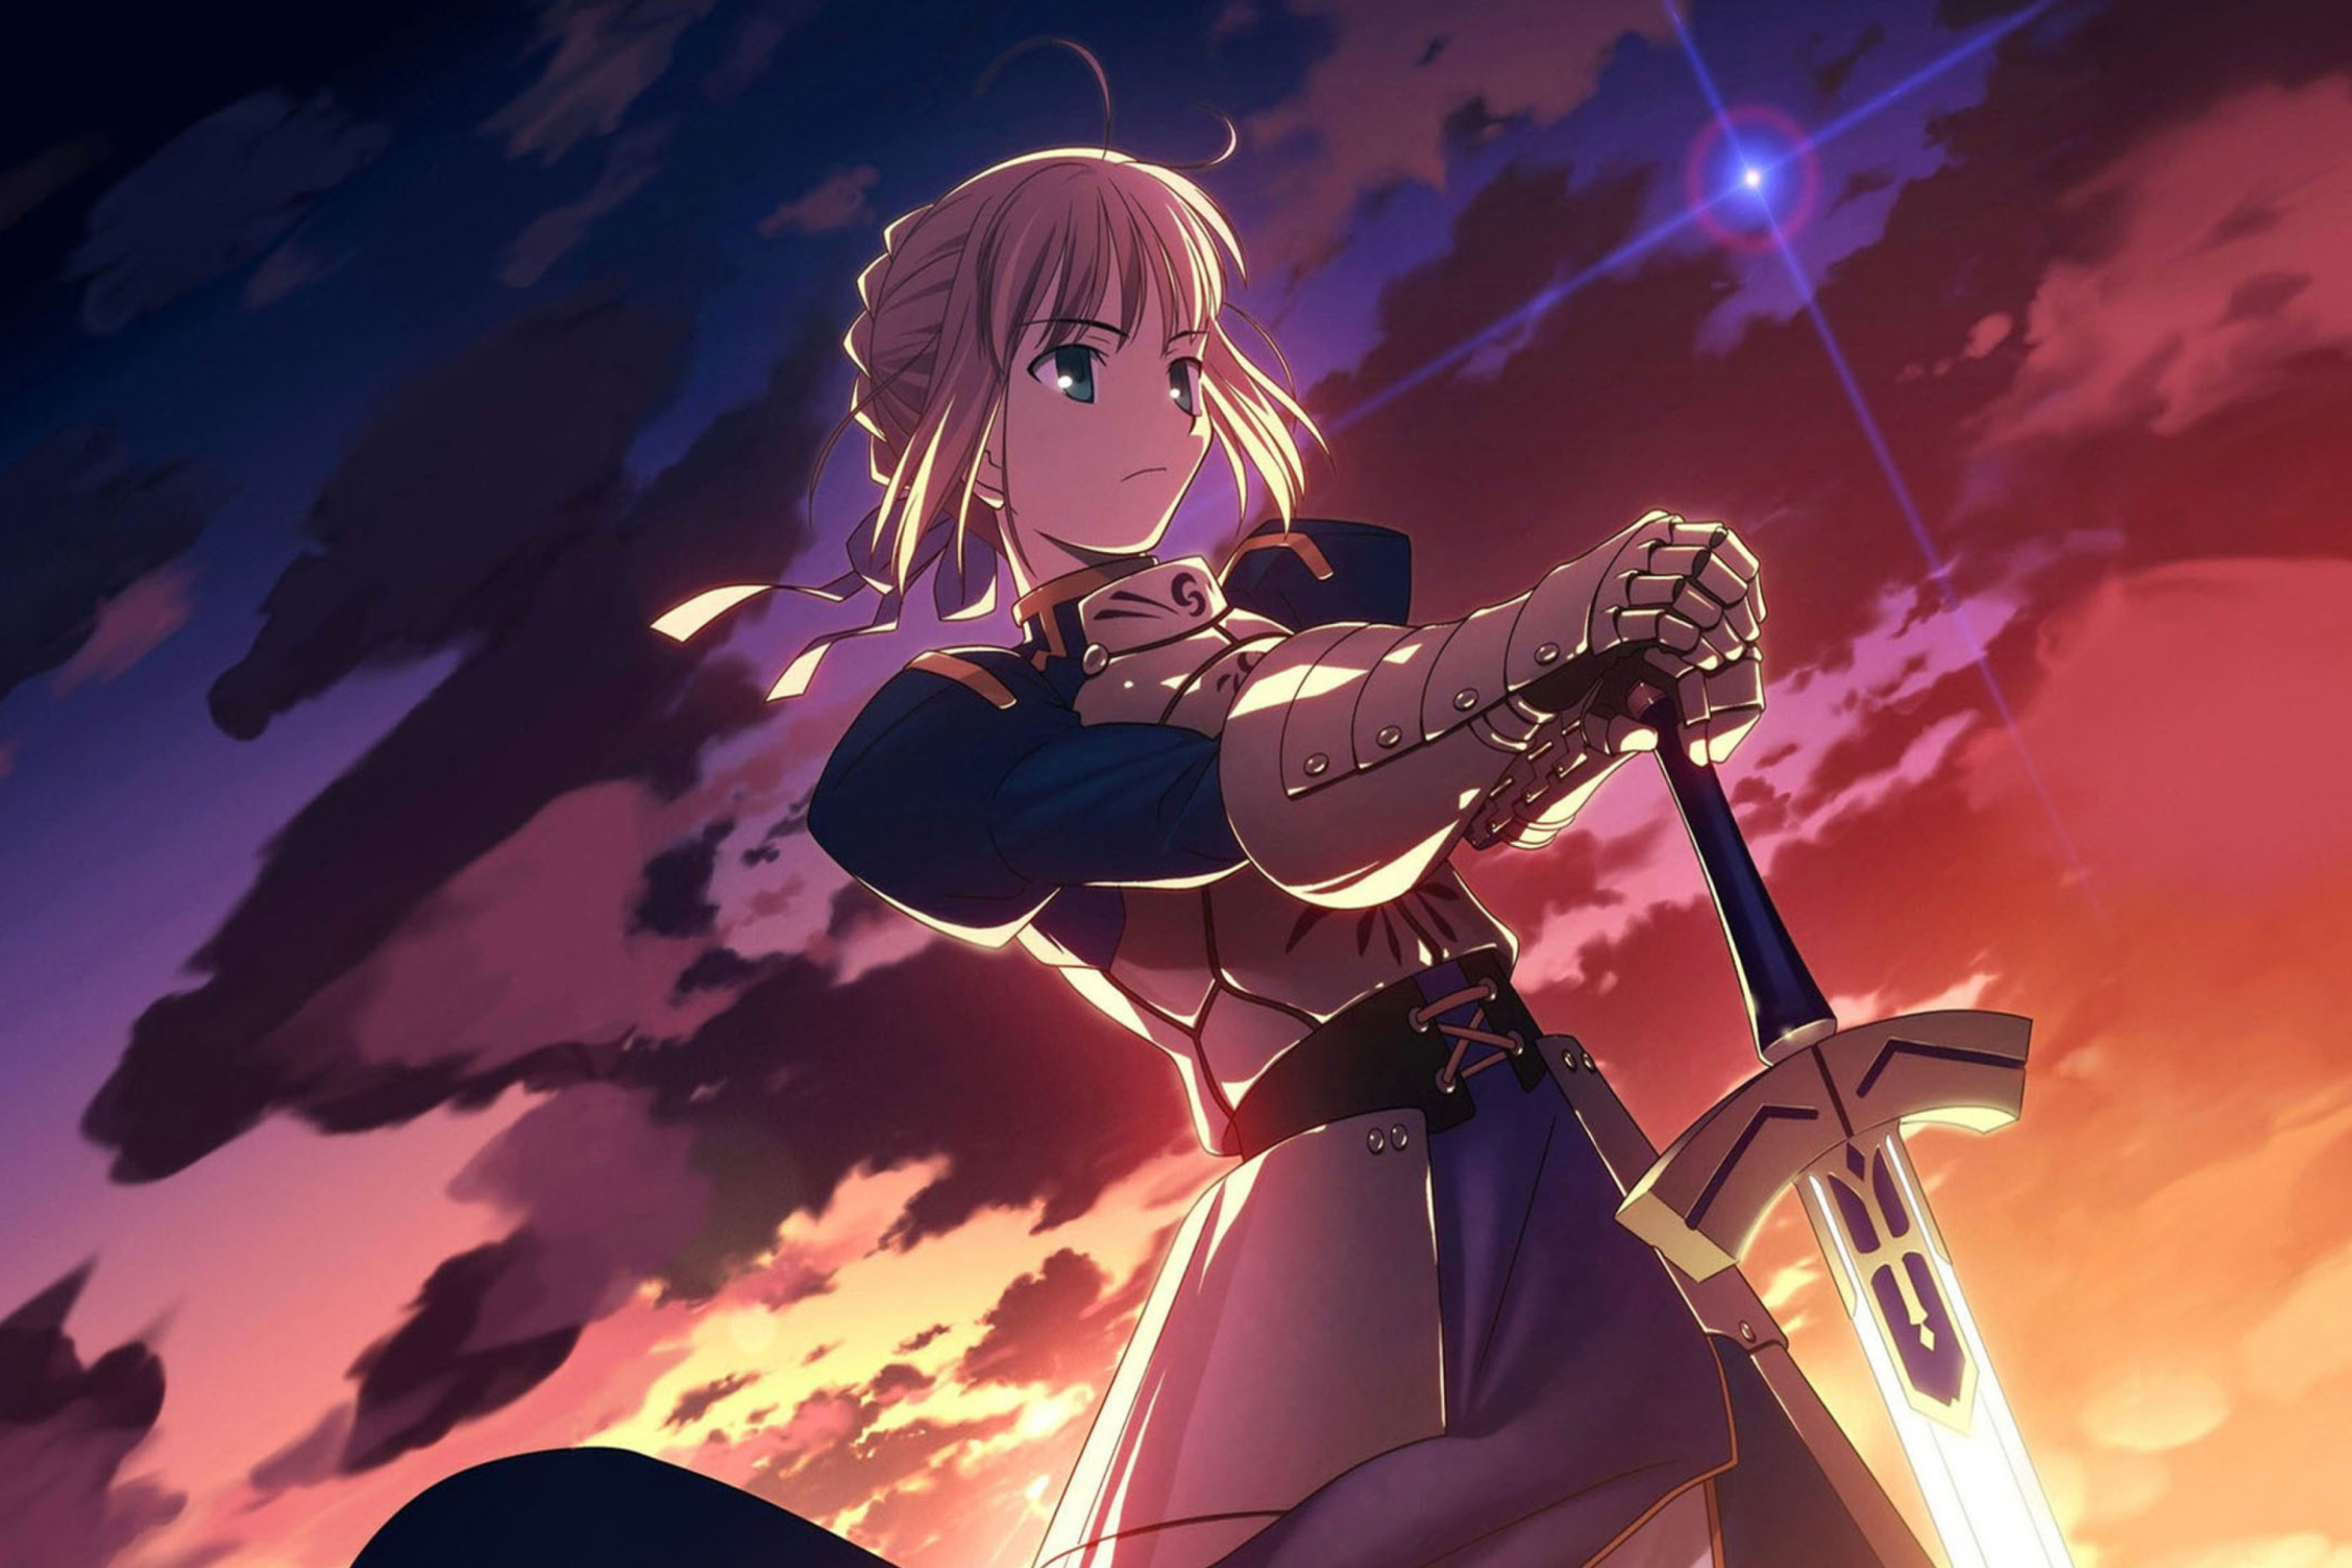 Saber from Fate/stay night screenshot #1 2880x1920